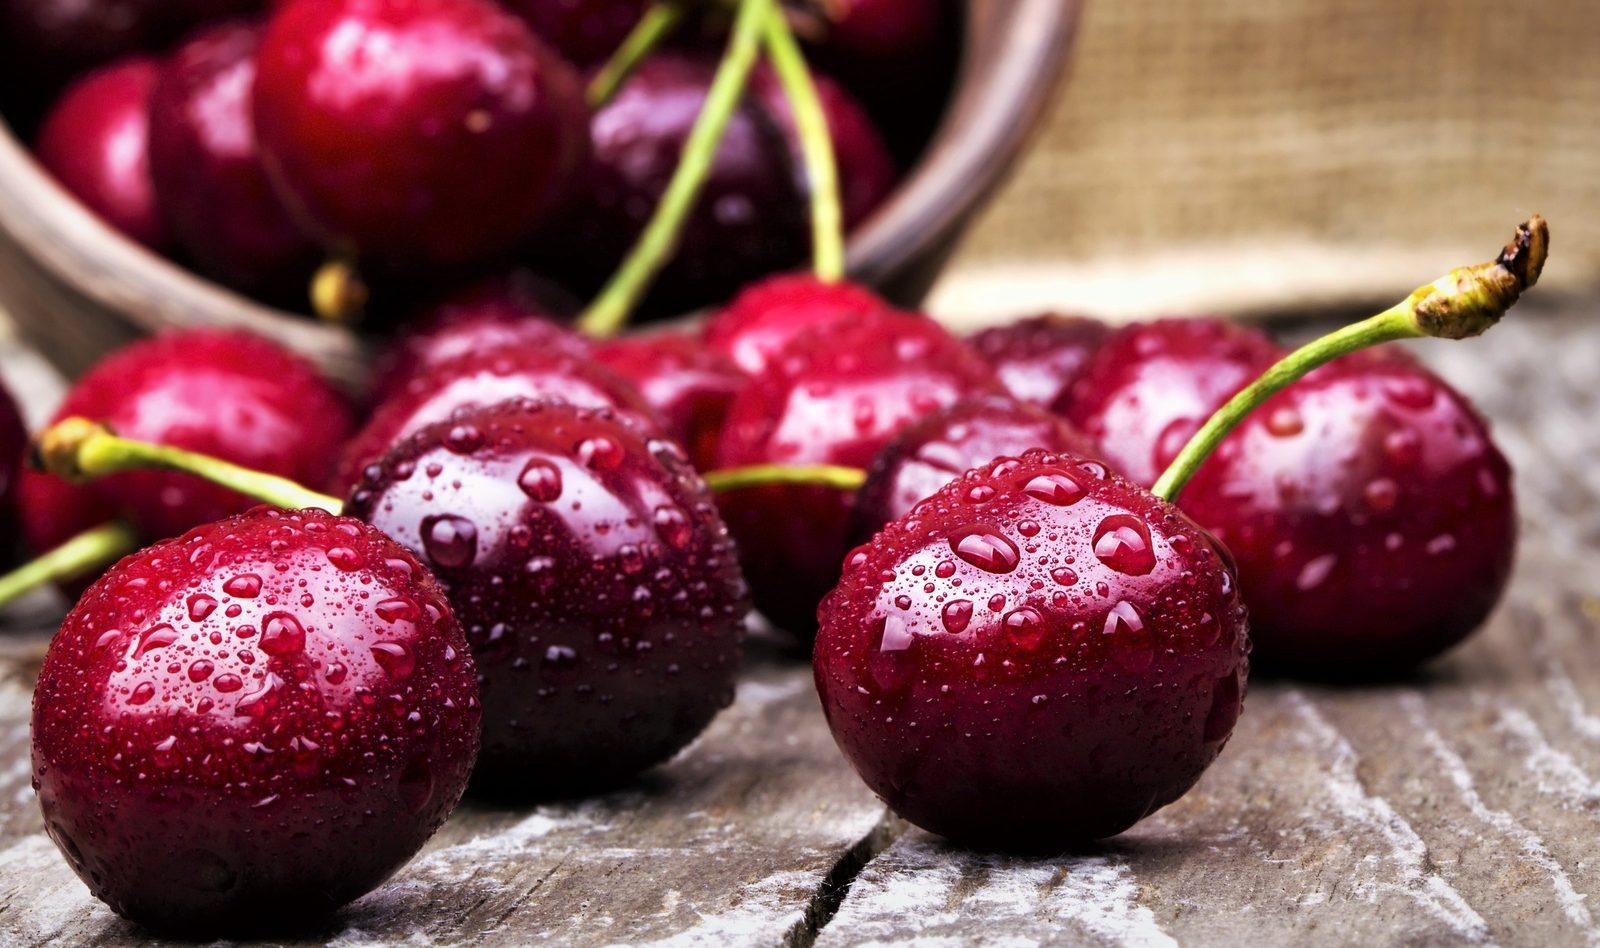 Cherry benefits for stomach